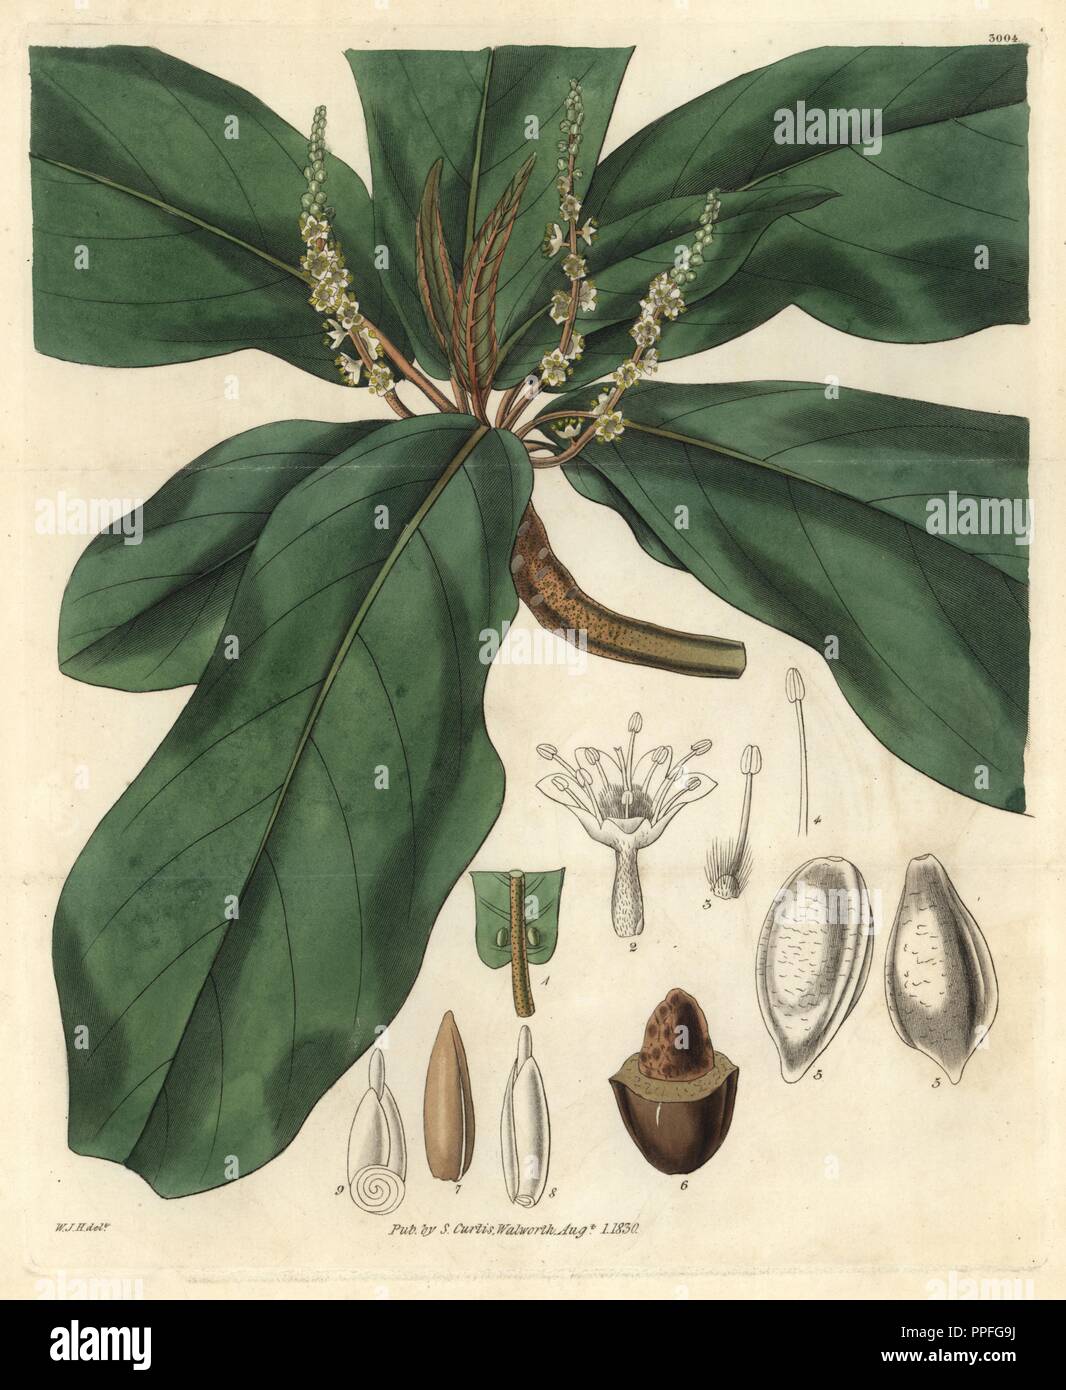 Broad downy-leaved terminalia or tropical almond tree, Terminalia catappa. Illustration drawn by William Jackson Hooker, engraved by Swan. Handcolored copperplate engraving from William Curtis's 'The Botanical Magazine,' Samuel Curtis, 1830. Hooker (1785-1865) was an English botanist, writer and artist. He was Regius Professor of Botany at Glasgow University, and editor of Curtis' 'Botanical Magazine' from 1827 to 1865. In 1841, he was appointed director of the Royal Botanic Gardens at Kew, and was succeeded by his son Joseph Dalton. Hooker documented the fern and orchid crazes that shook Engl Stock Photo